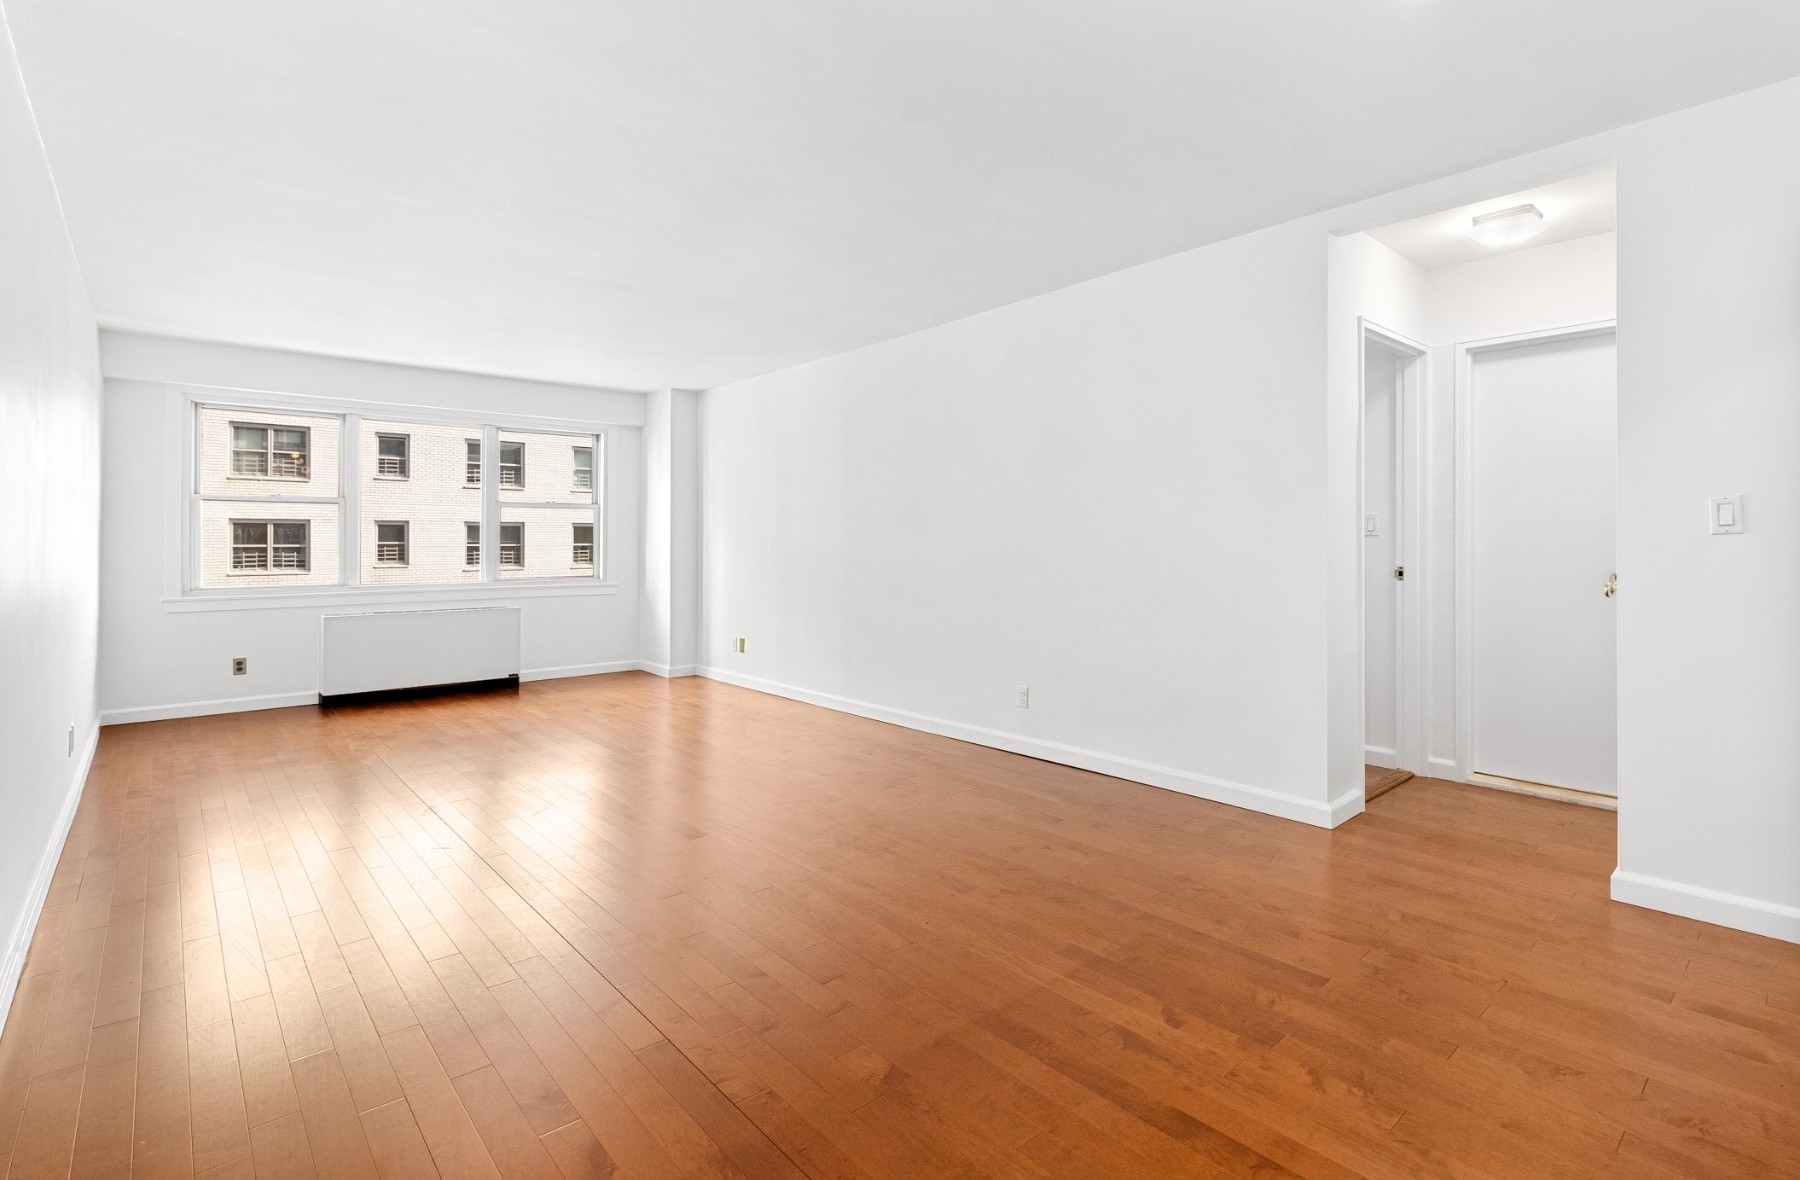 Co-op Properties for Sale at John Jay House, 520 E 76TH ST, 7G Lenox Hill, New York, New York 10021